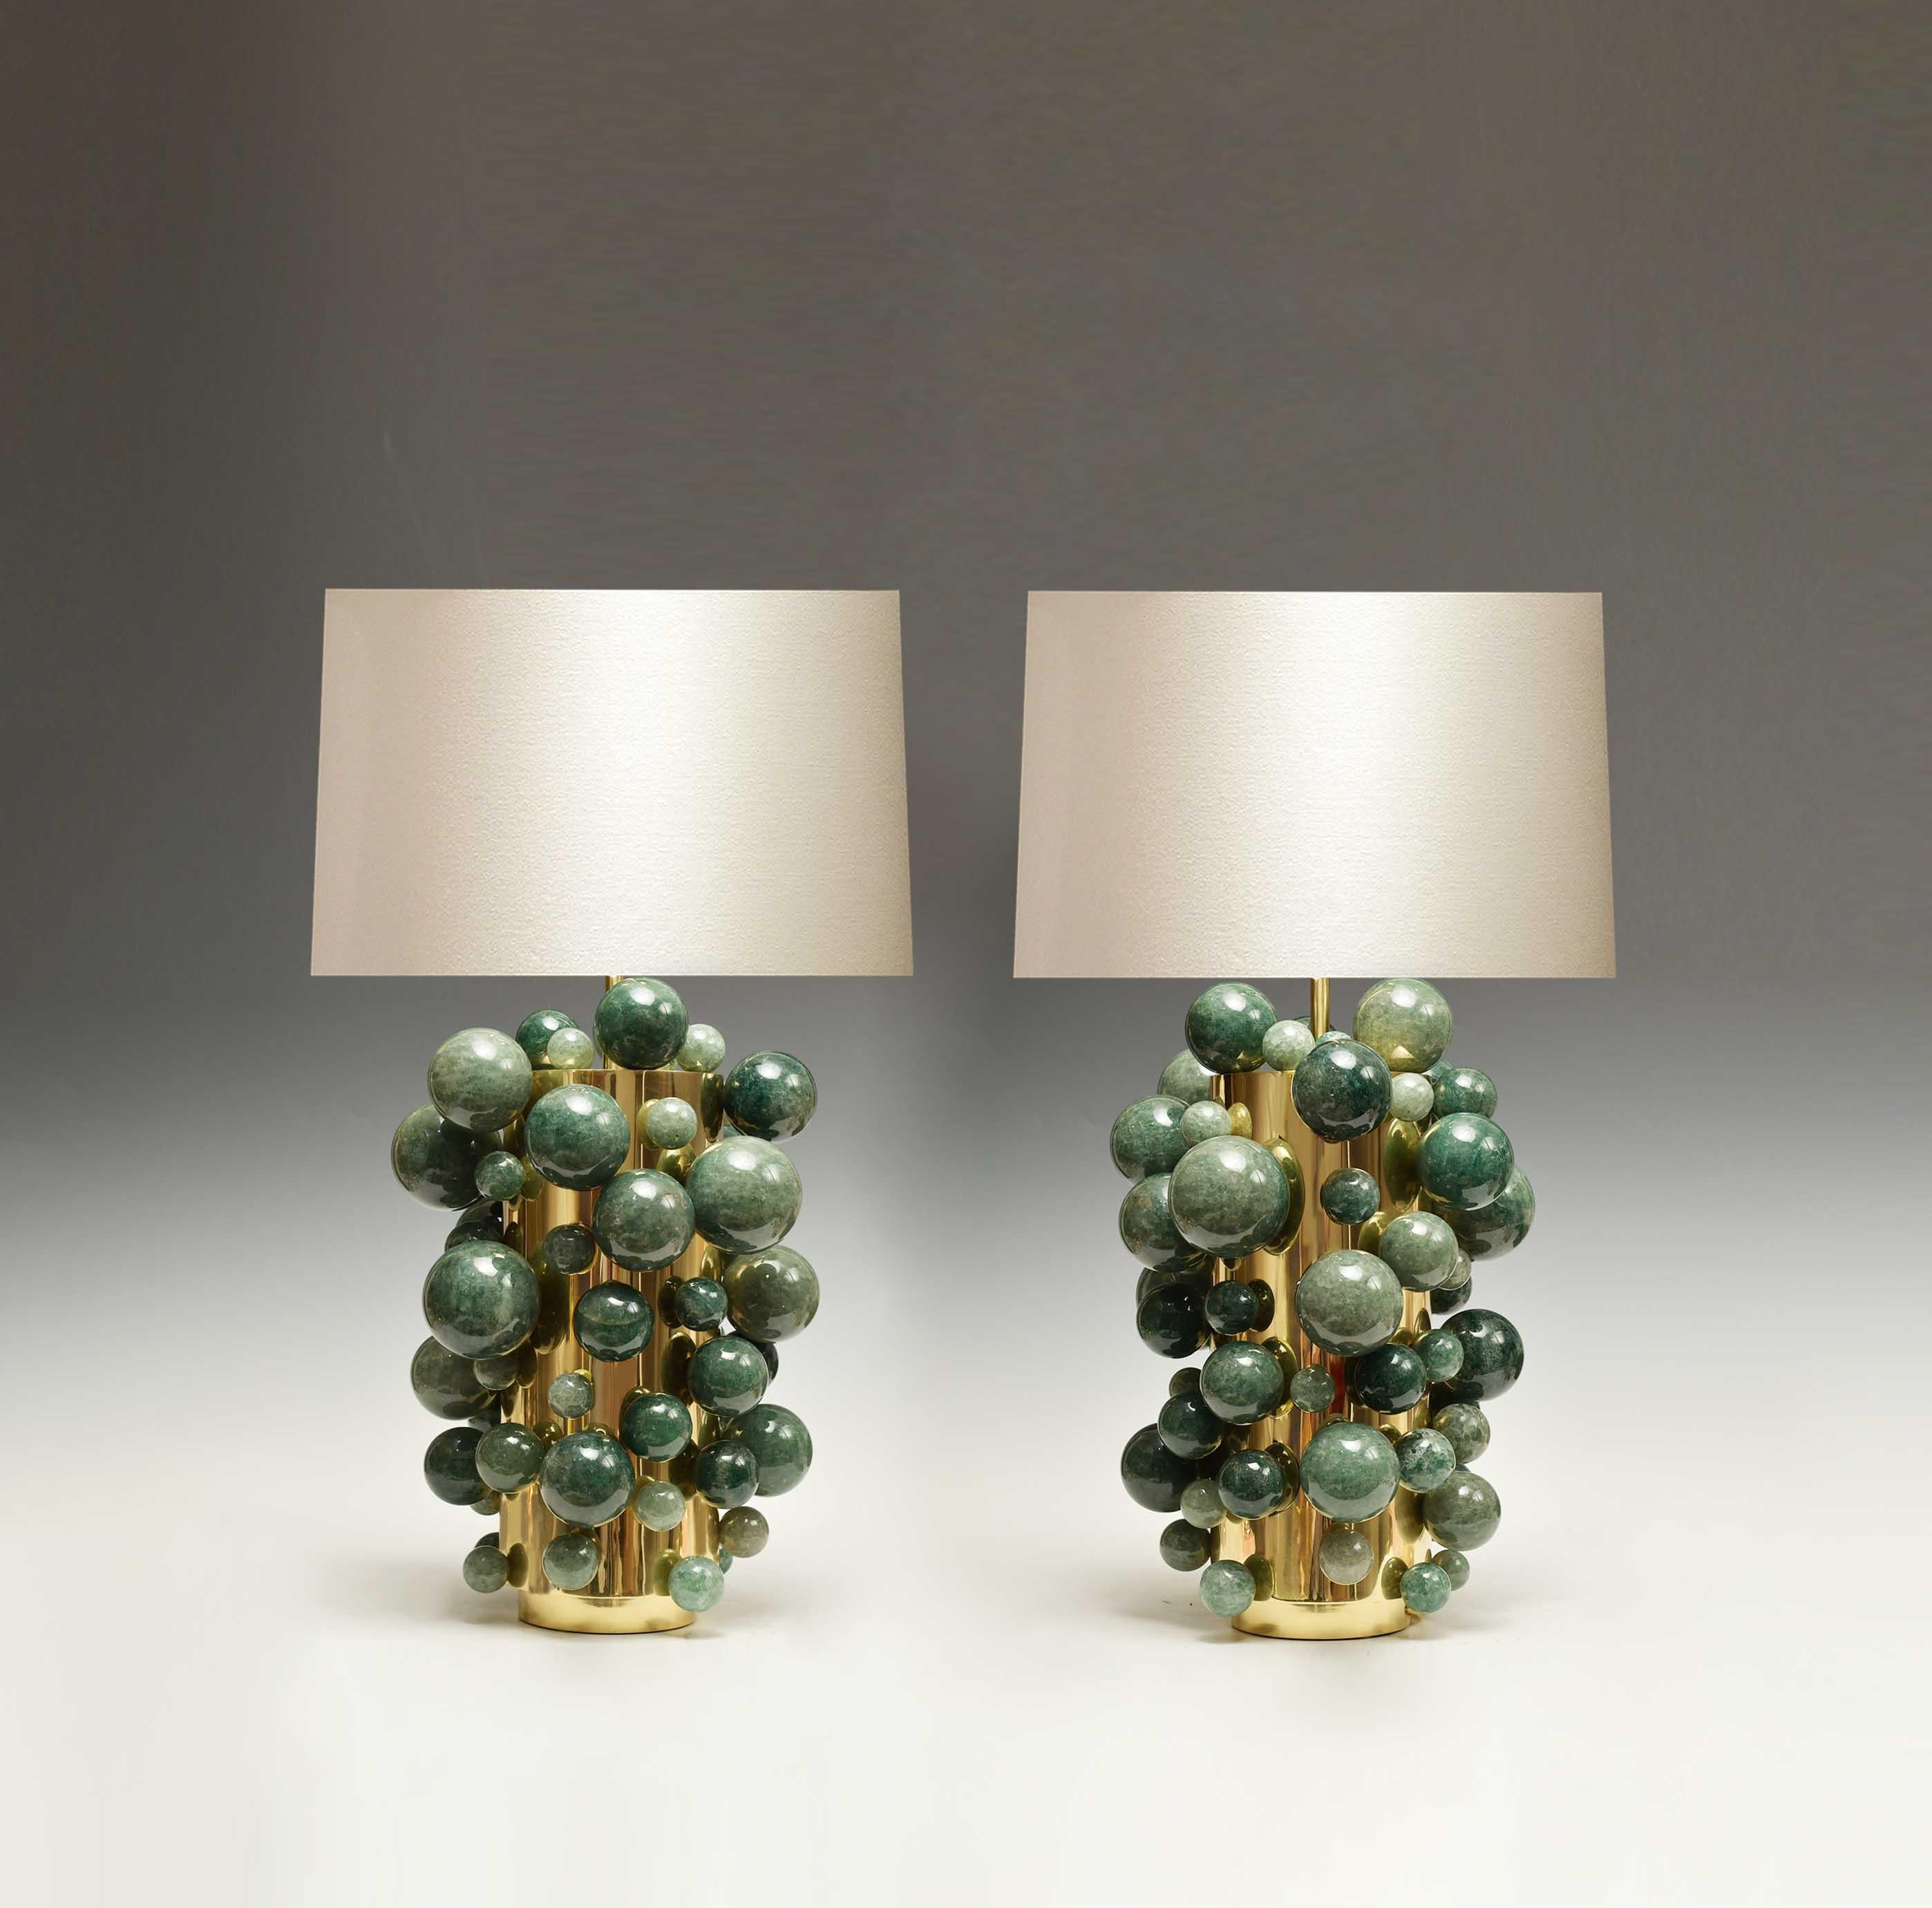 Pair of luxury green rock crystal quartz bubble lamps with polished brass frames. Created by Phoenix Gallery, NYC.
Each lamp installed two sockets.
To the top of the rock crystal 17 inch.
Lampshade not included.